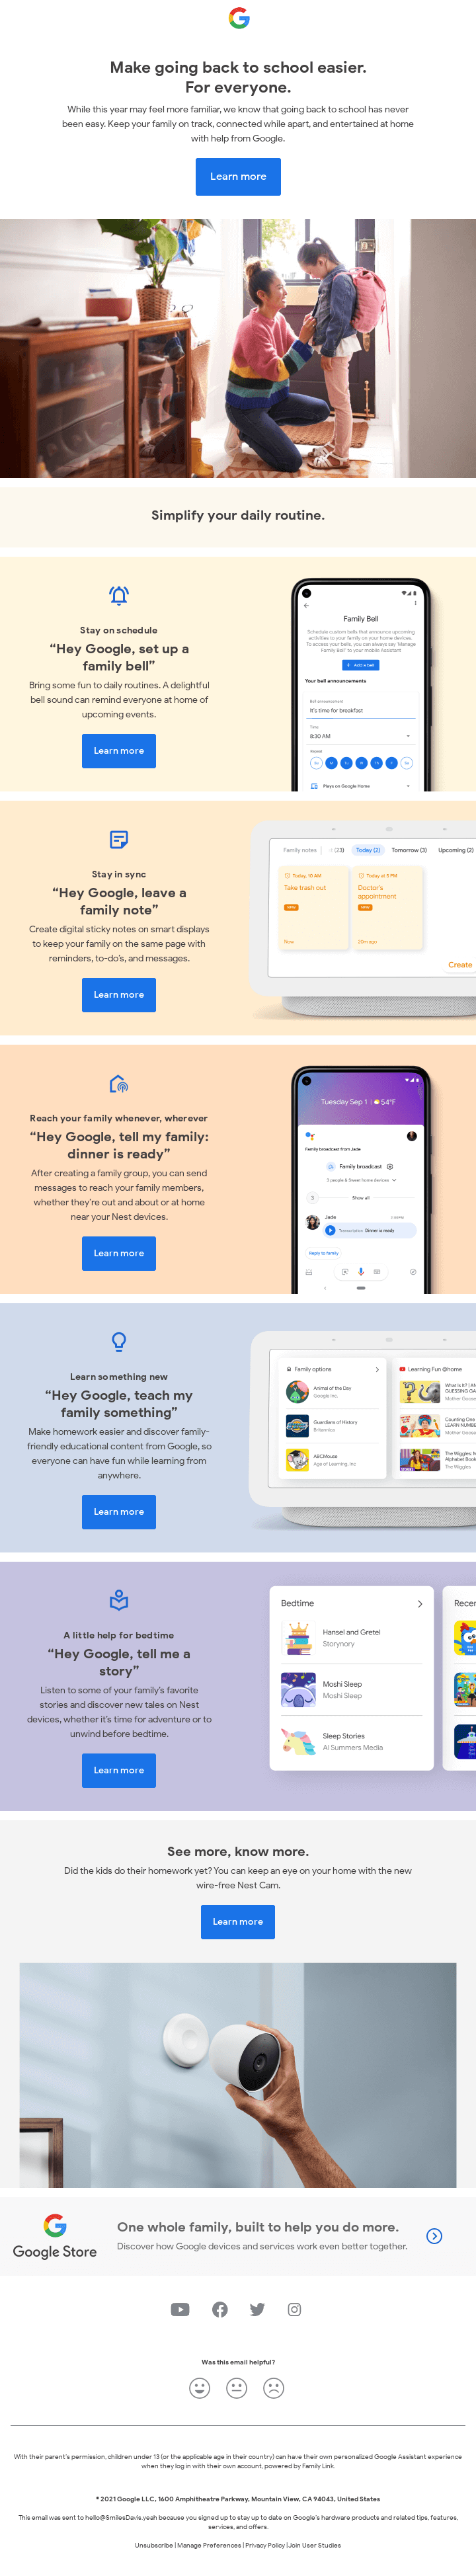 Keep your family on track with Google